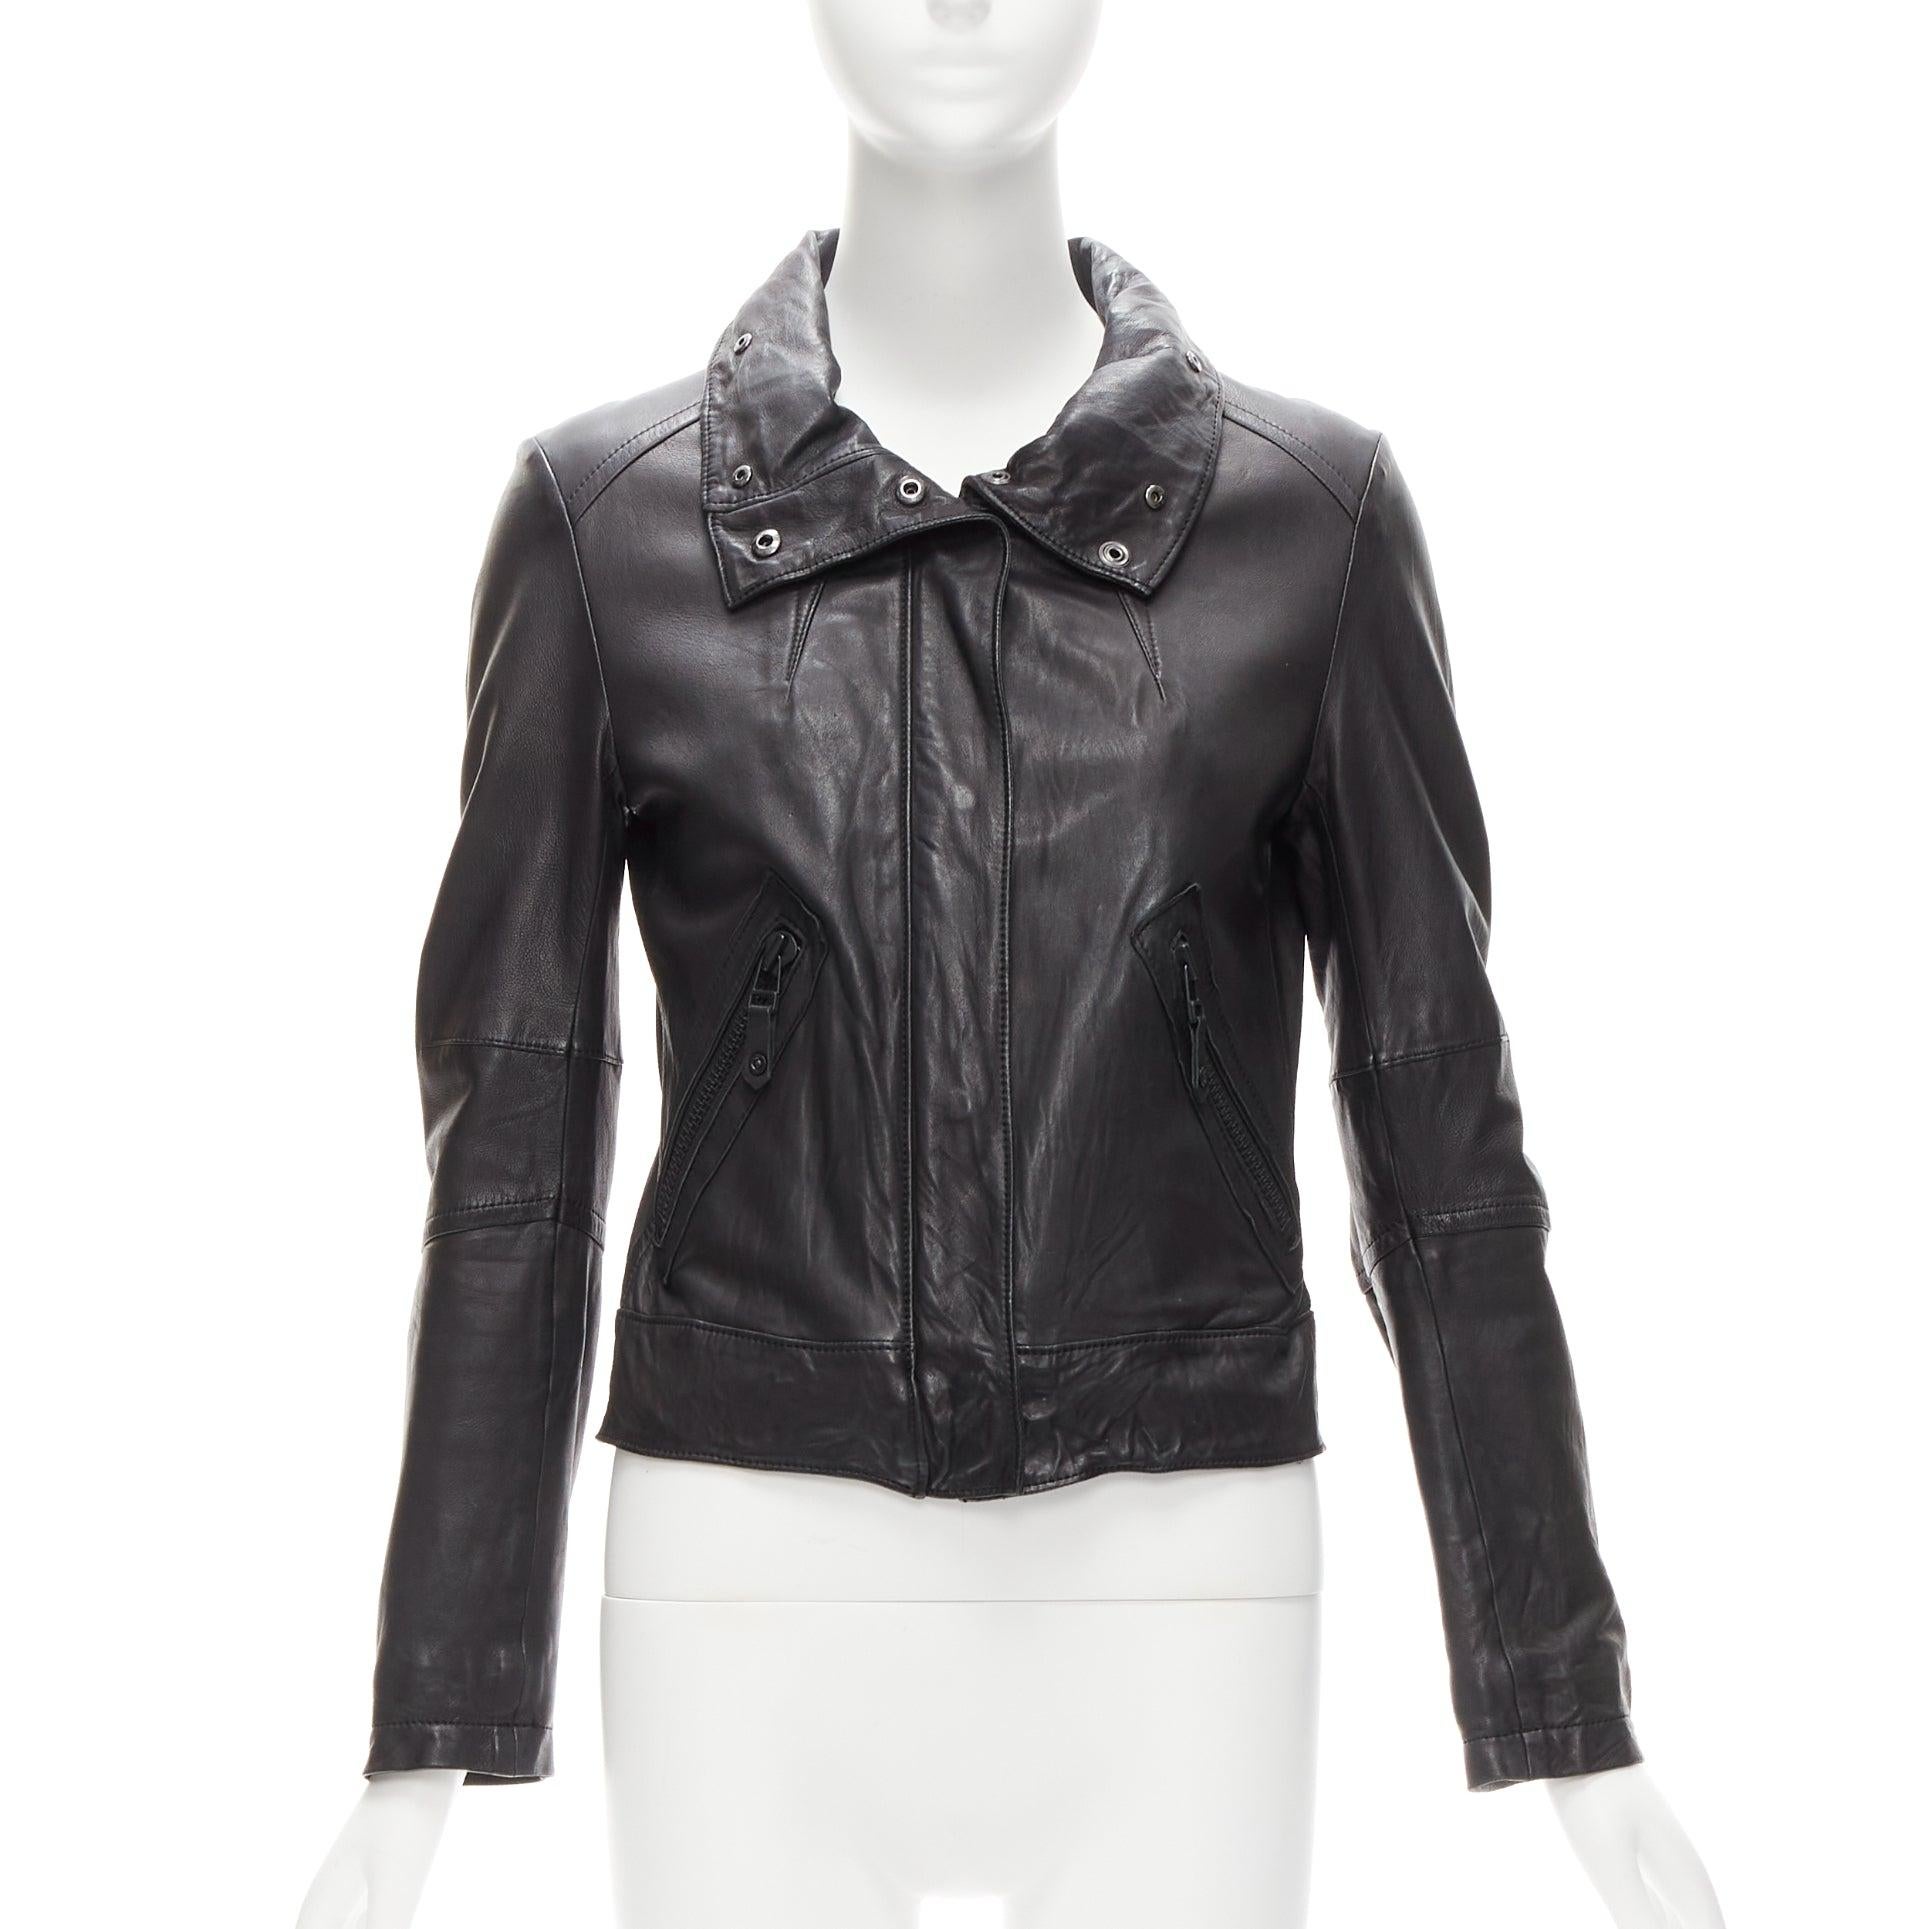 ATSURO TAYAMA black sheepskin leather 2 way collar biker jacket US4 S
Reference: CELG/A00383
Brand: Atsuro Tayama
Material: Leather
Color: Black
Pattern: Solid
Closure: Zip
Lining: Multicolour Fabric
Made in: China

CONDITION:
Condition: Good, this